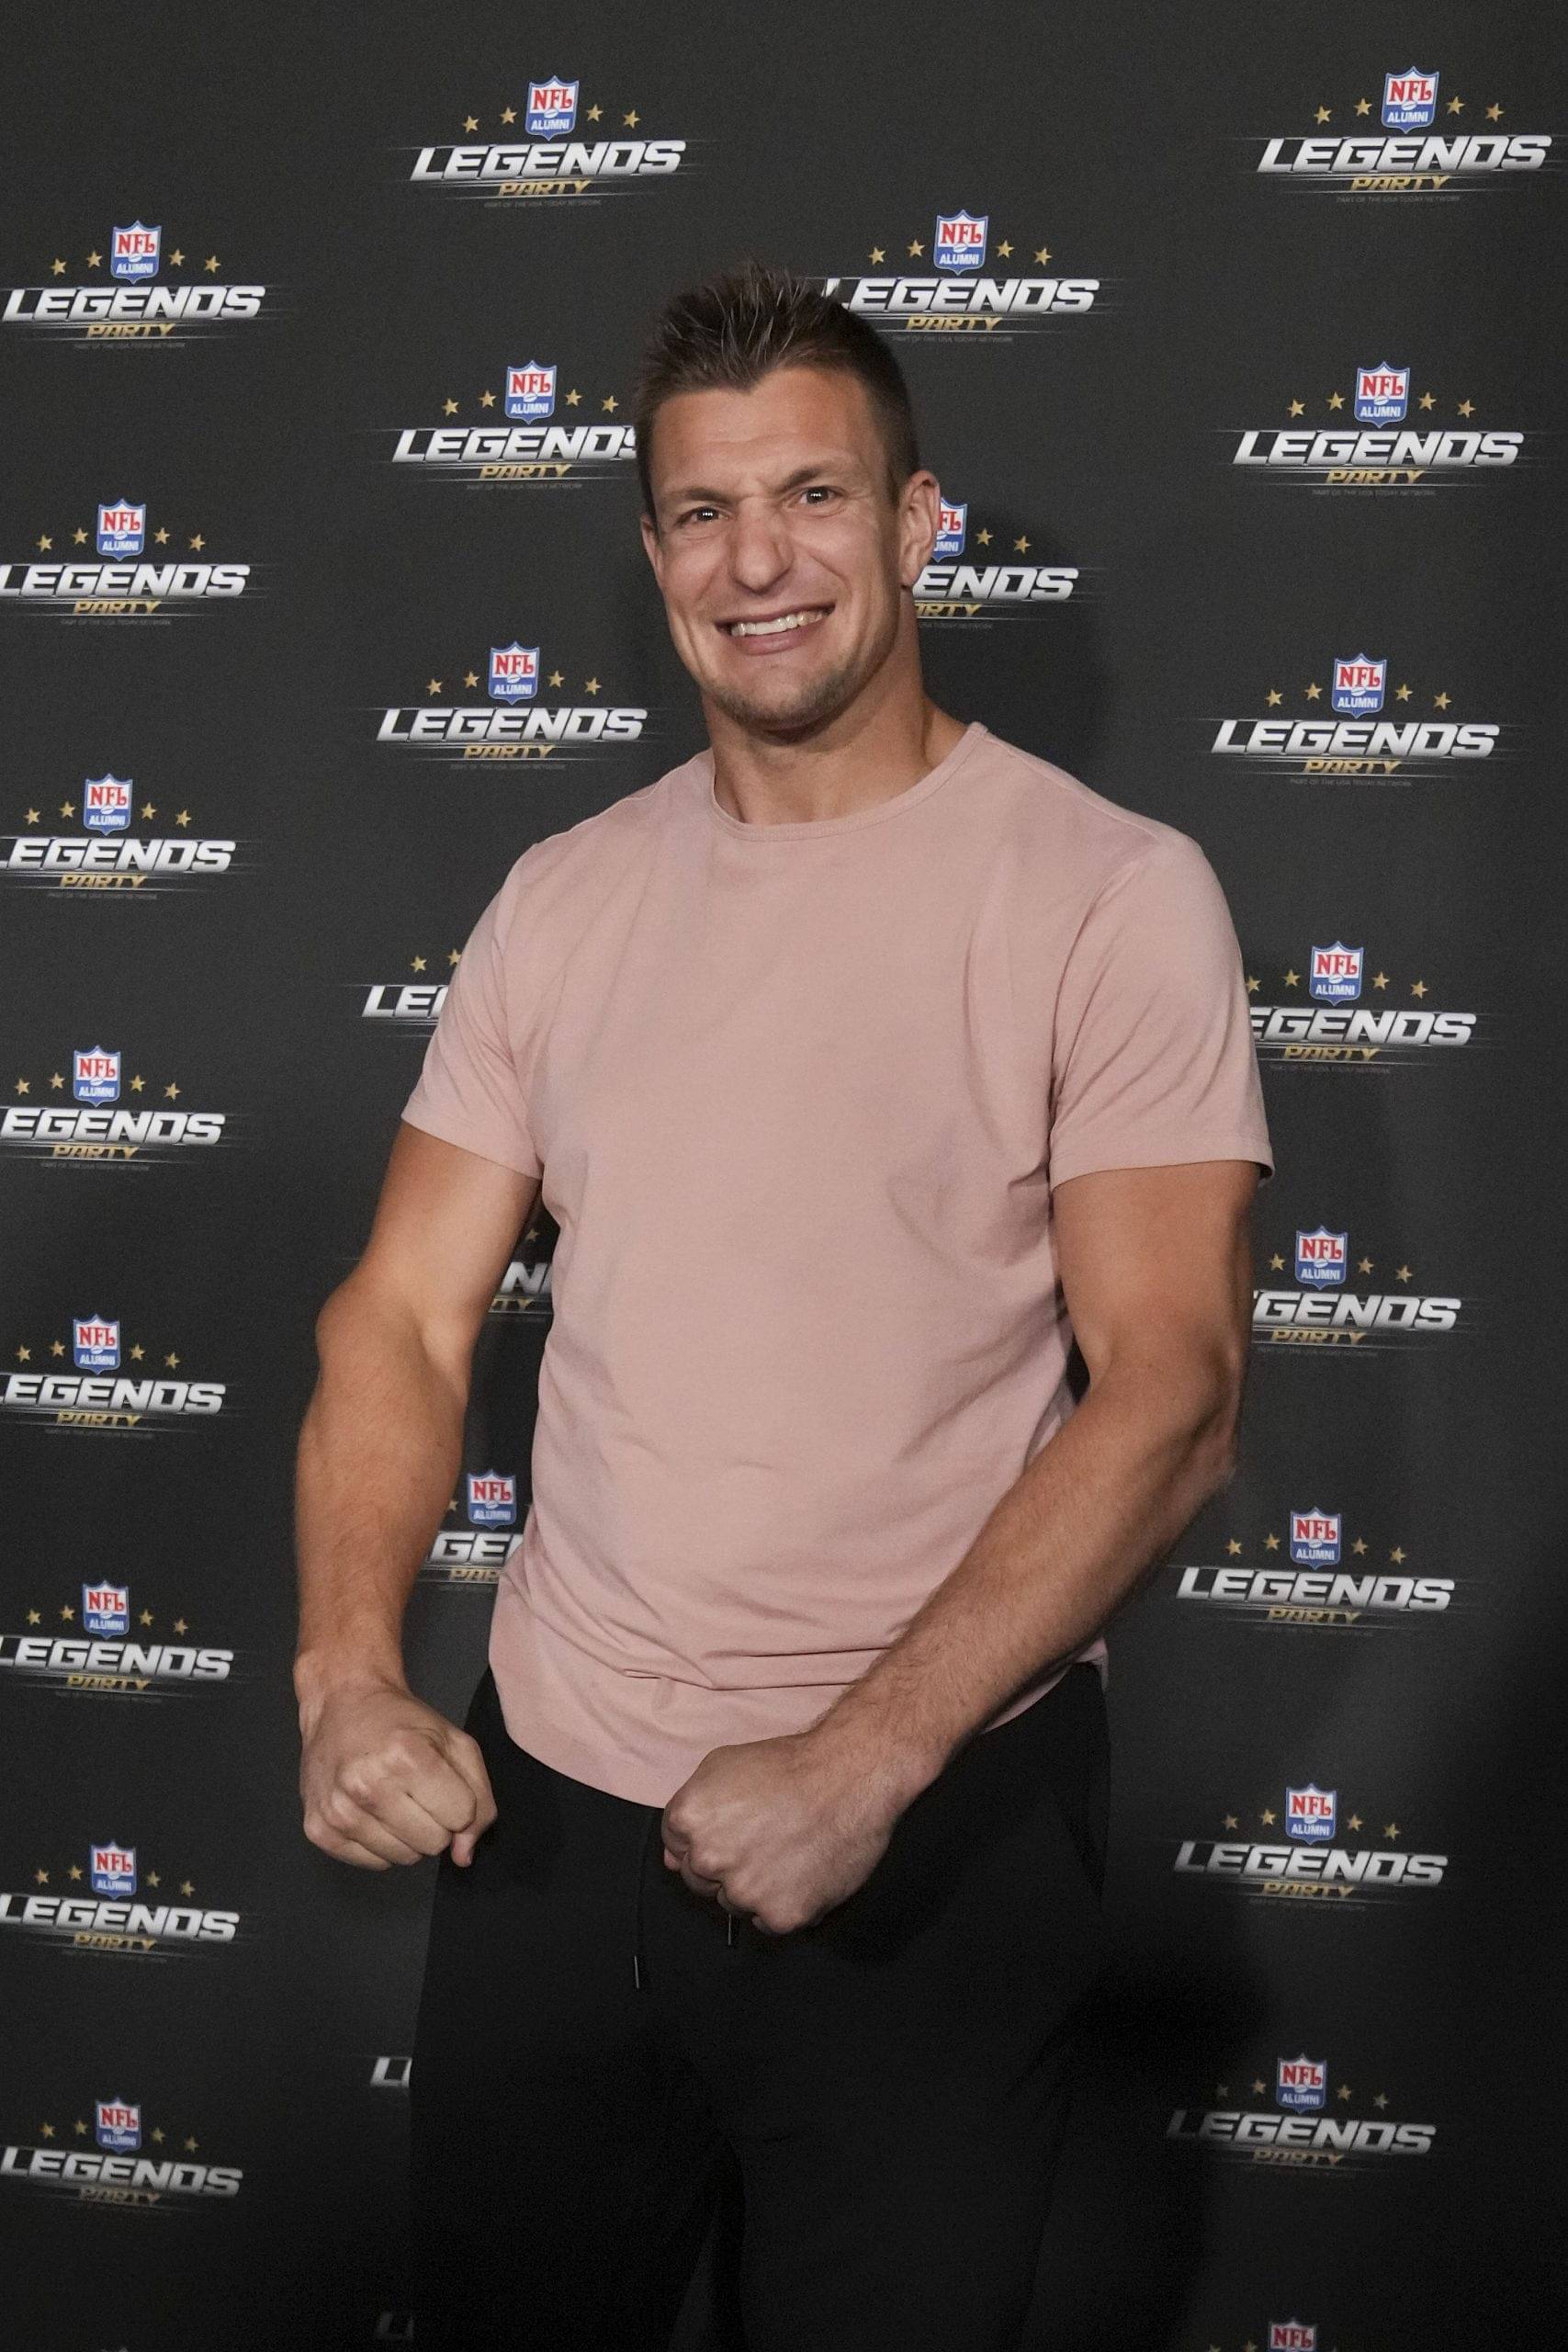 "I Was Trying to Peek in the in the Room": Rob Gronkowski Candidly Reveals How He Couldn't Stop Looking at His Friend Jason Taylor's Sister Joy